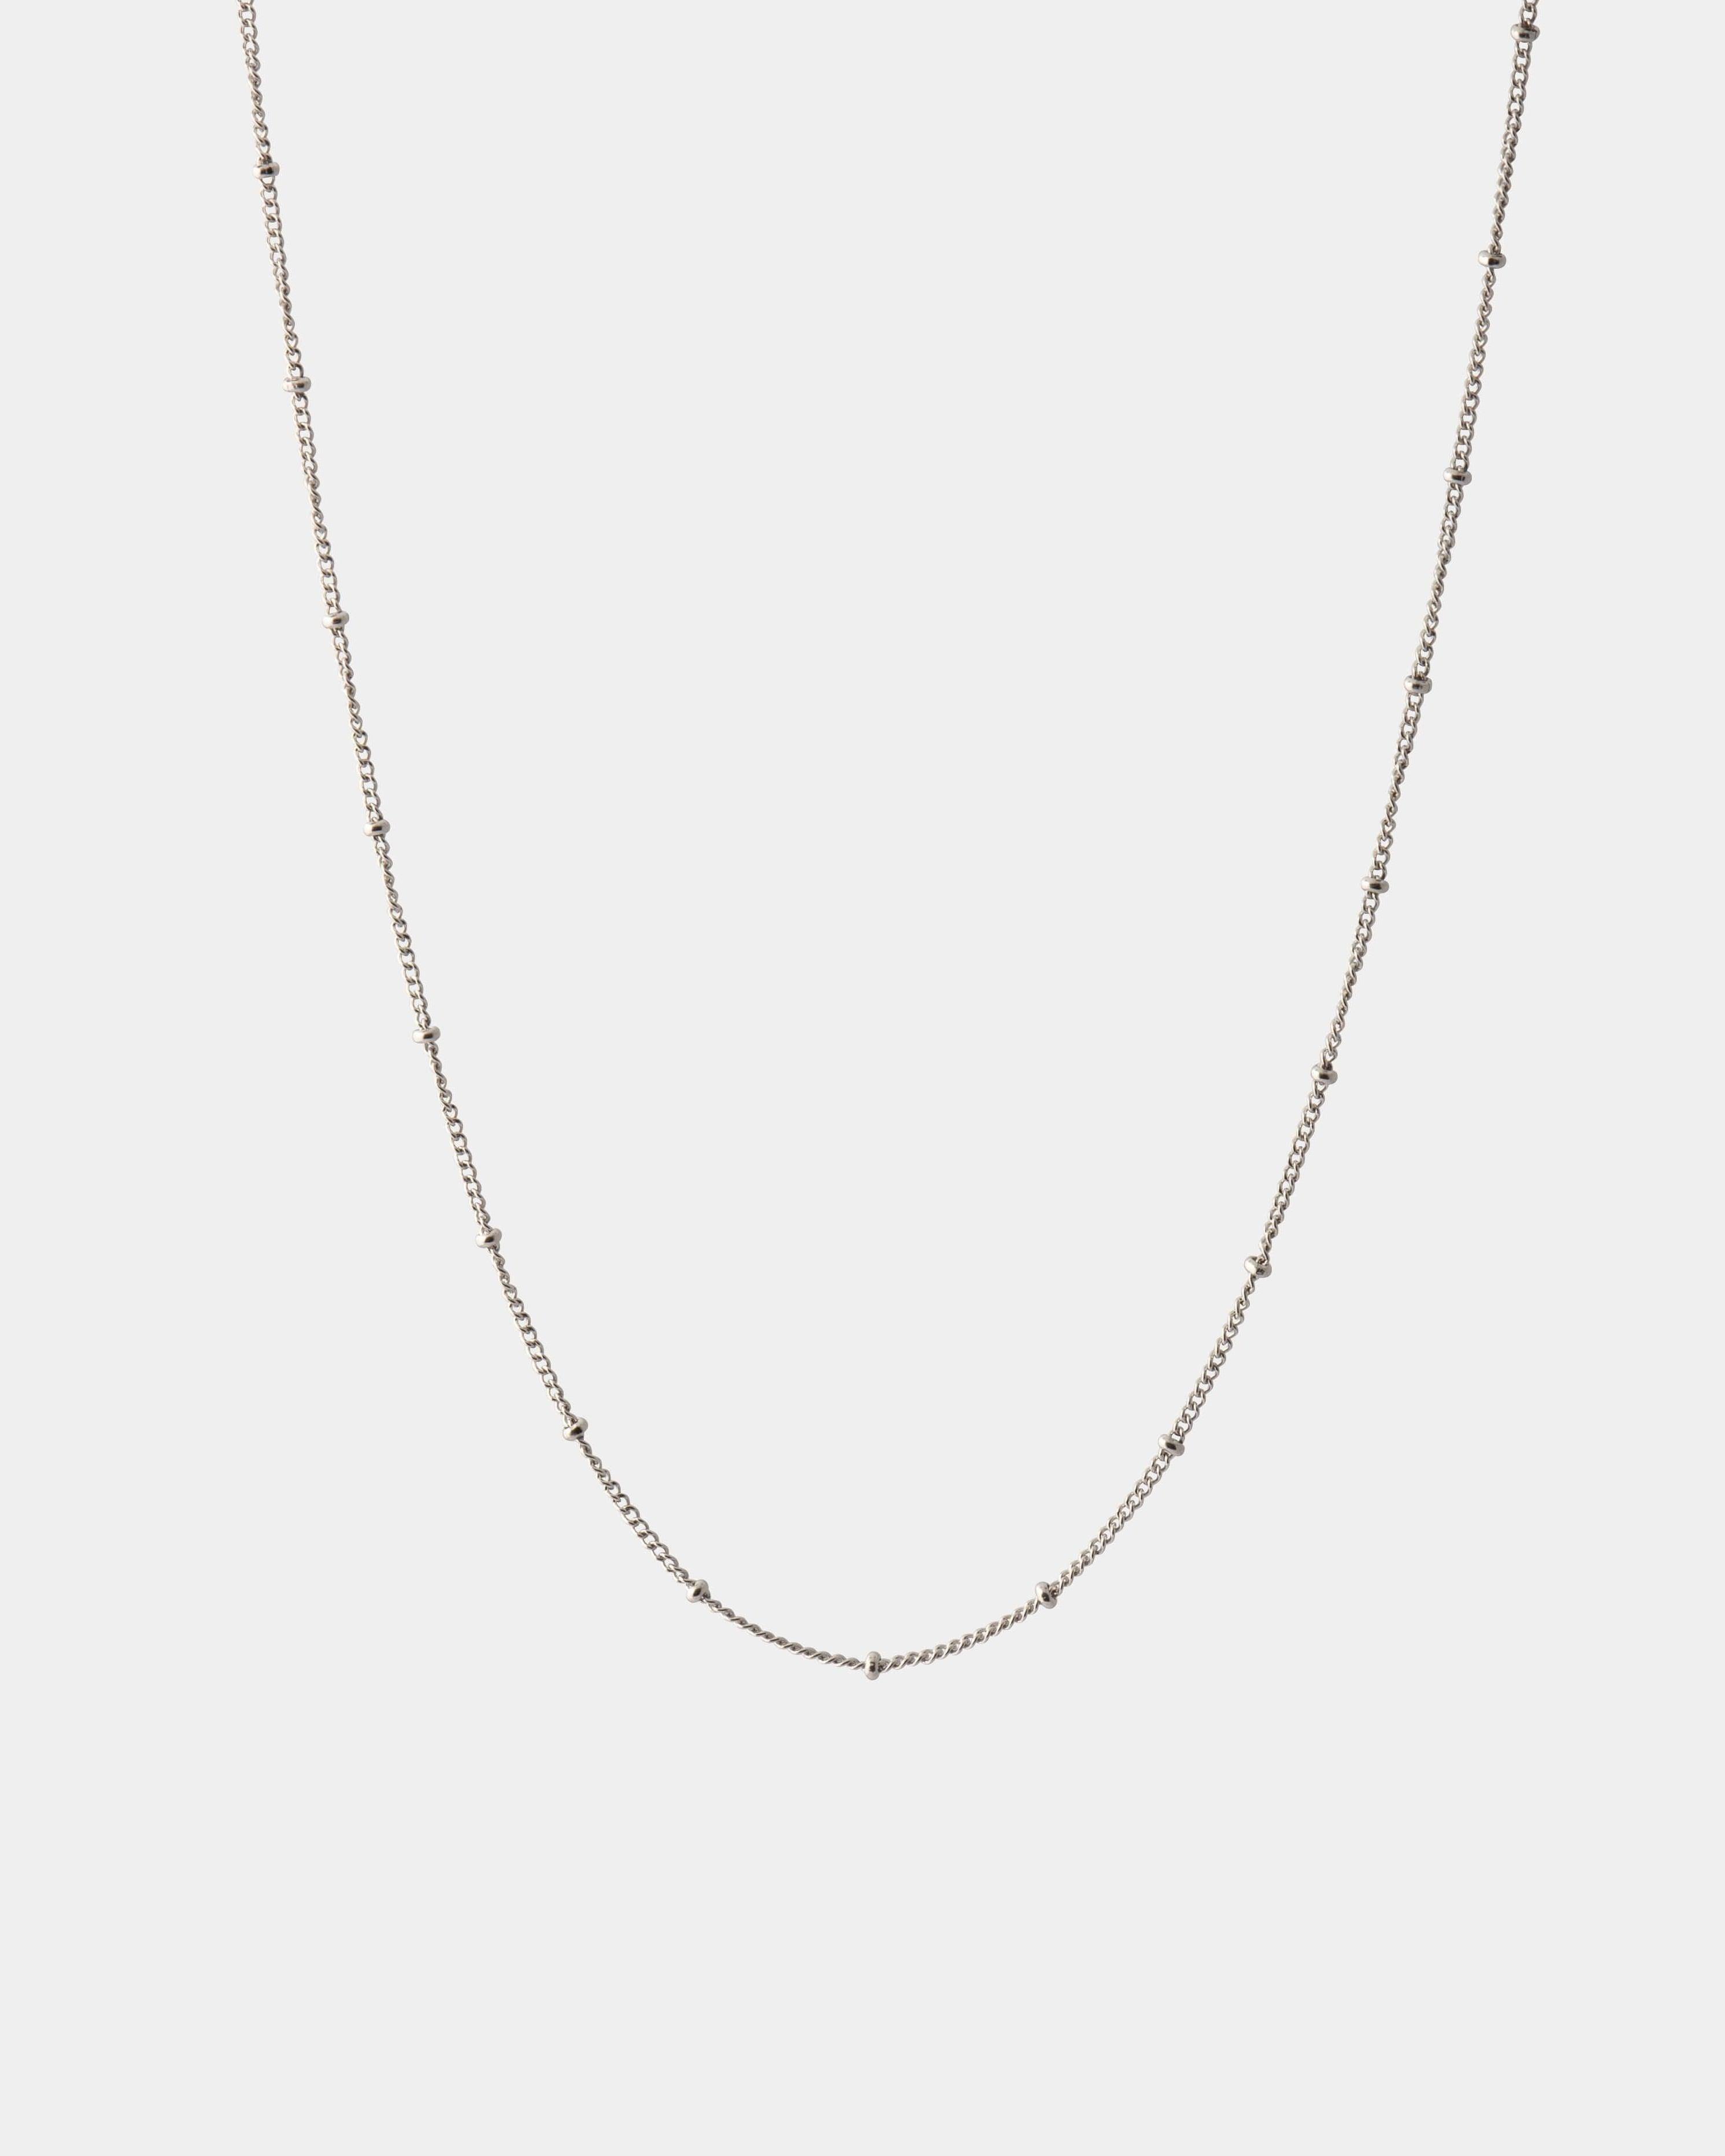 LINK CHAIN NECKLACE - LIMELY